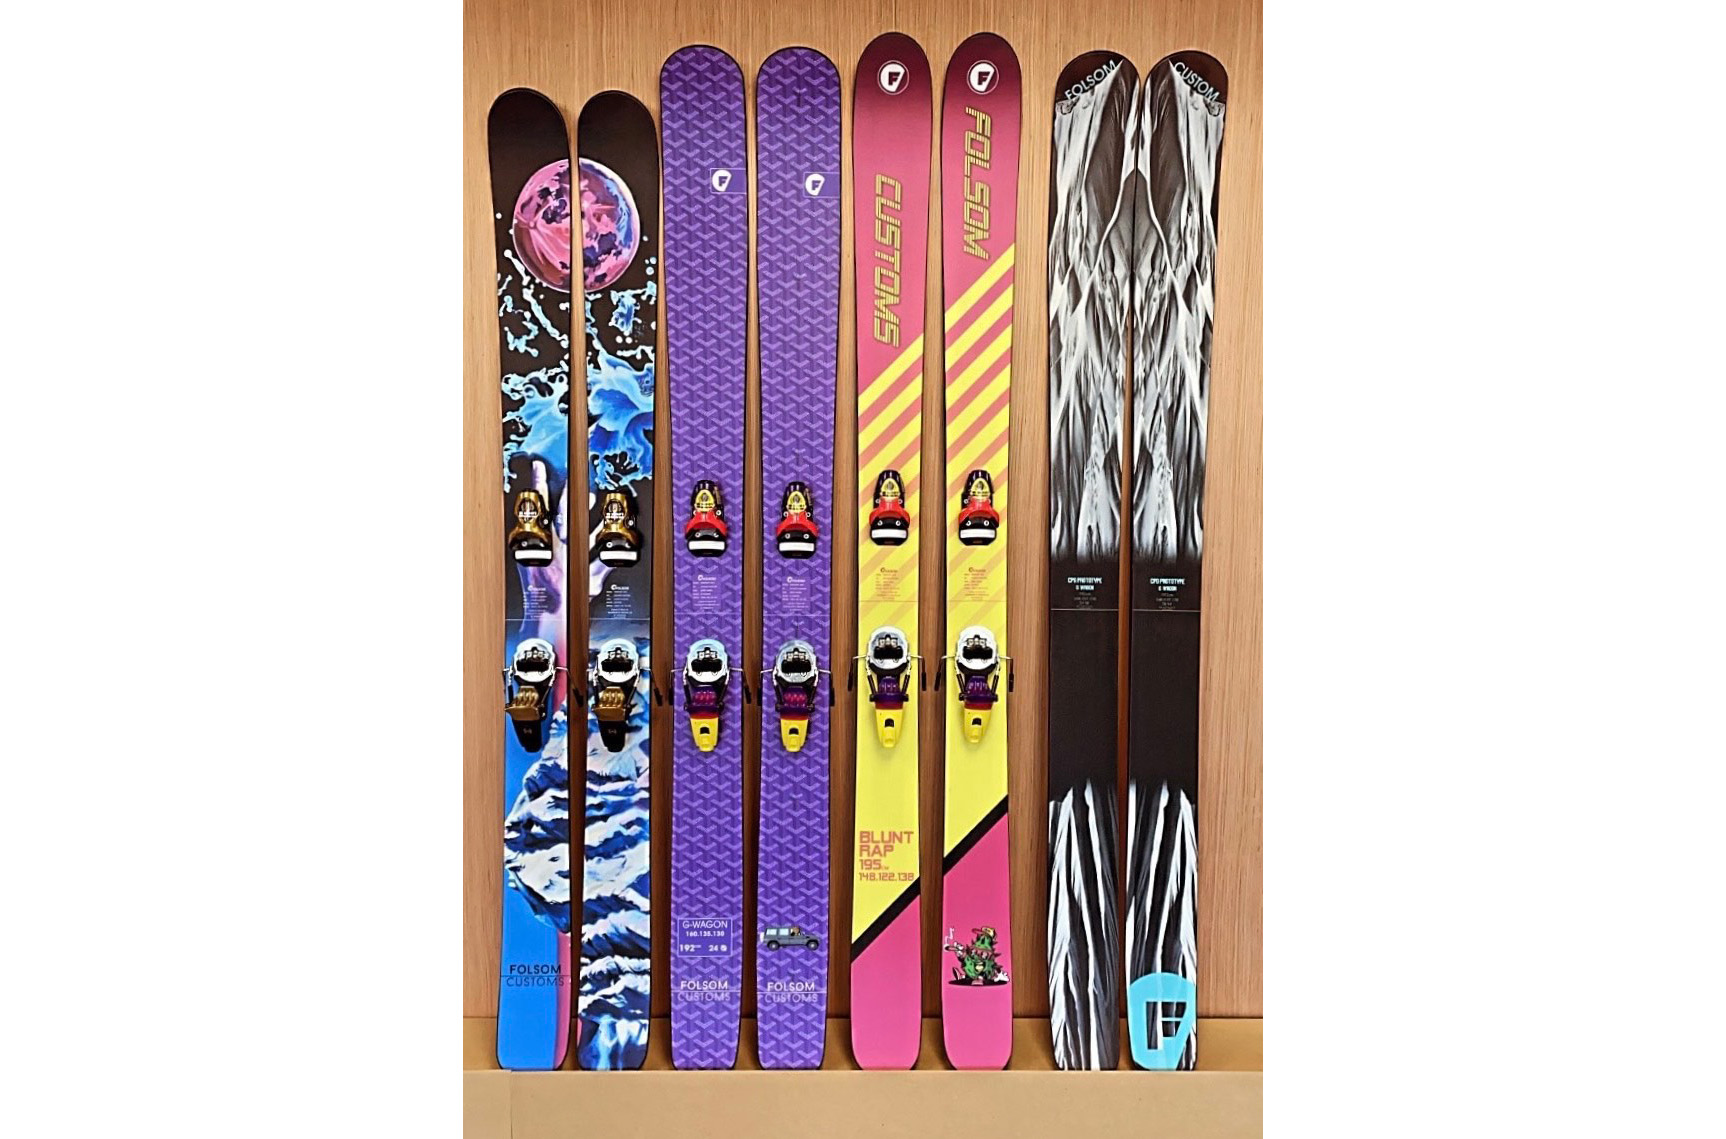 on Blister's GEAR:30 podcast, we talk with Folsom Custom Skis CEO, Mike McCabe, about Folsom's 2022-2023 ski lineup, their new UltraLITE touring ski construction, using graphene in skis, new Cash 93 and G-Wagon ski shapes, and more